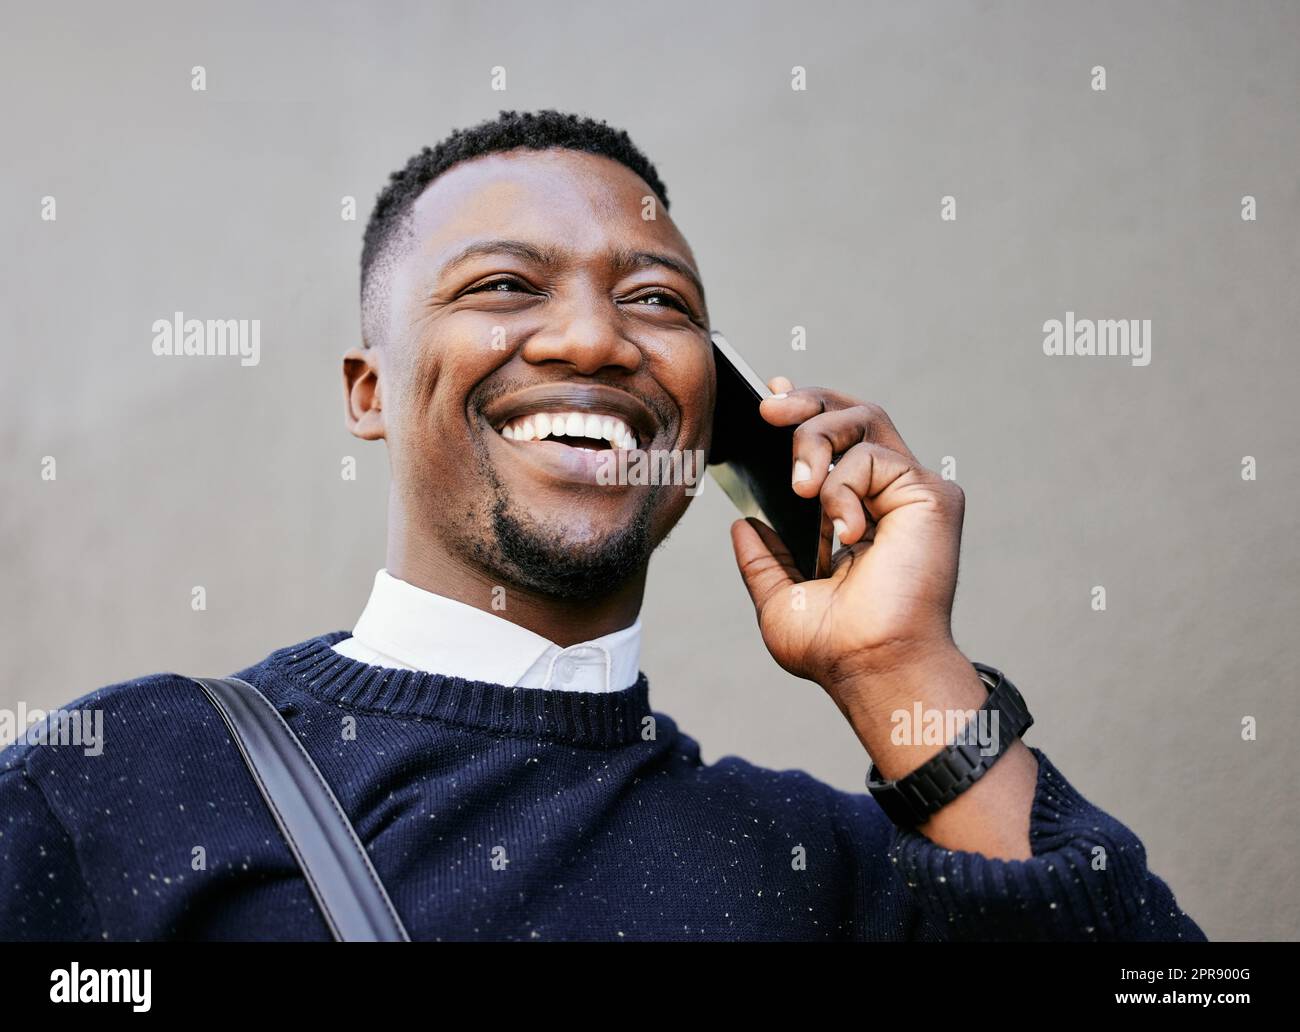 African american male on a phone call with his mobile device outside a building during the day while smiling Young black male talking on a phone while commuting to work Stock Photo